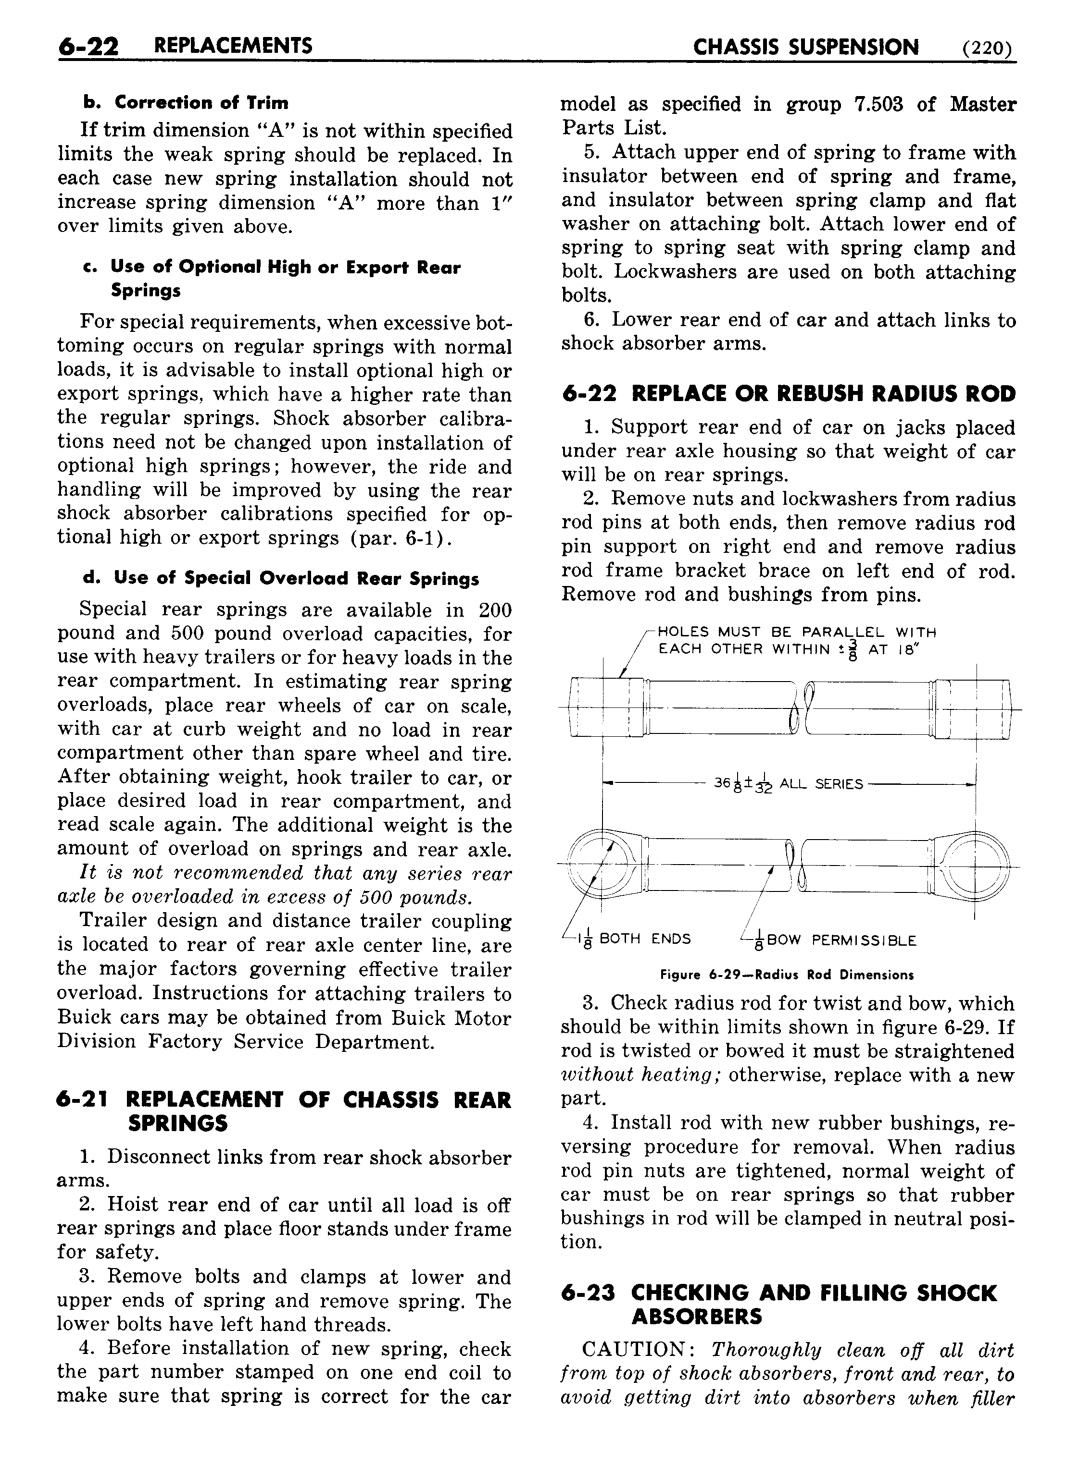 n_07 1948 Buick Shop Manual - Chassis Suspension-022-022.jpg